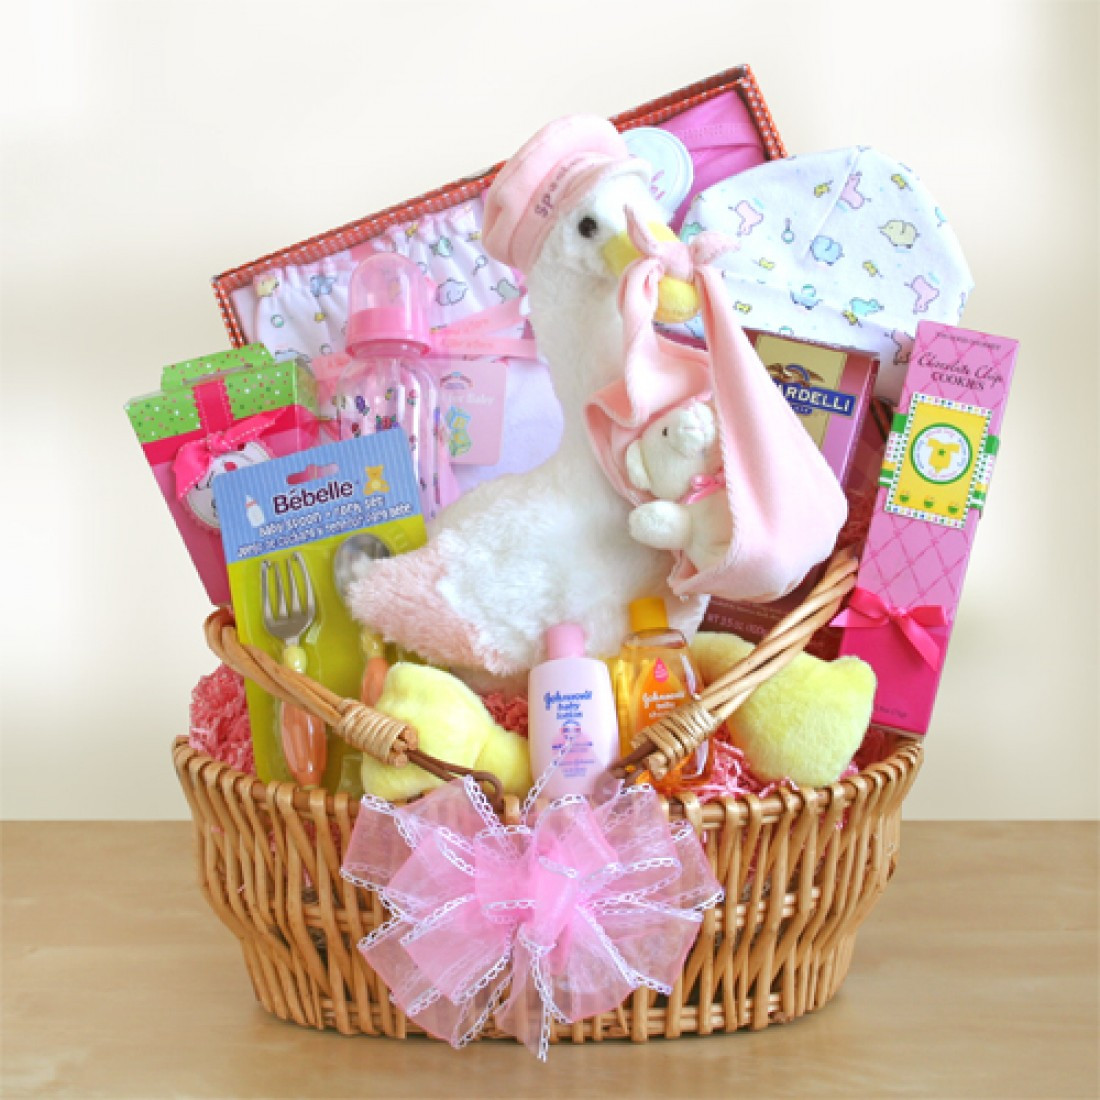 Baby Gift Basket Delivery
 Special Stork Delivery Baby Girl Basket